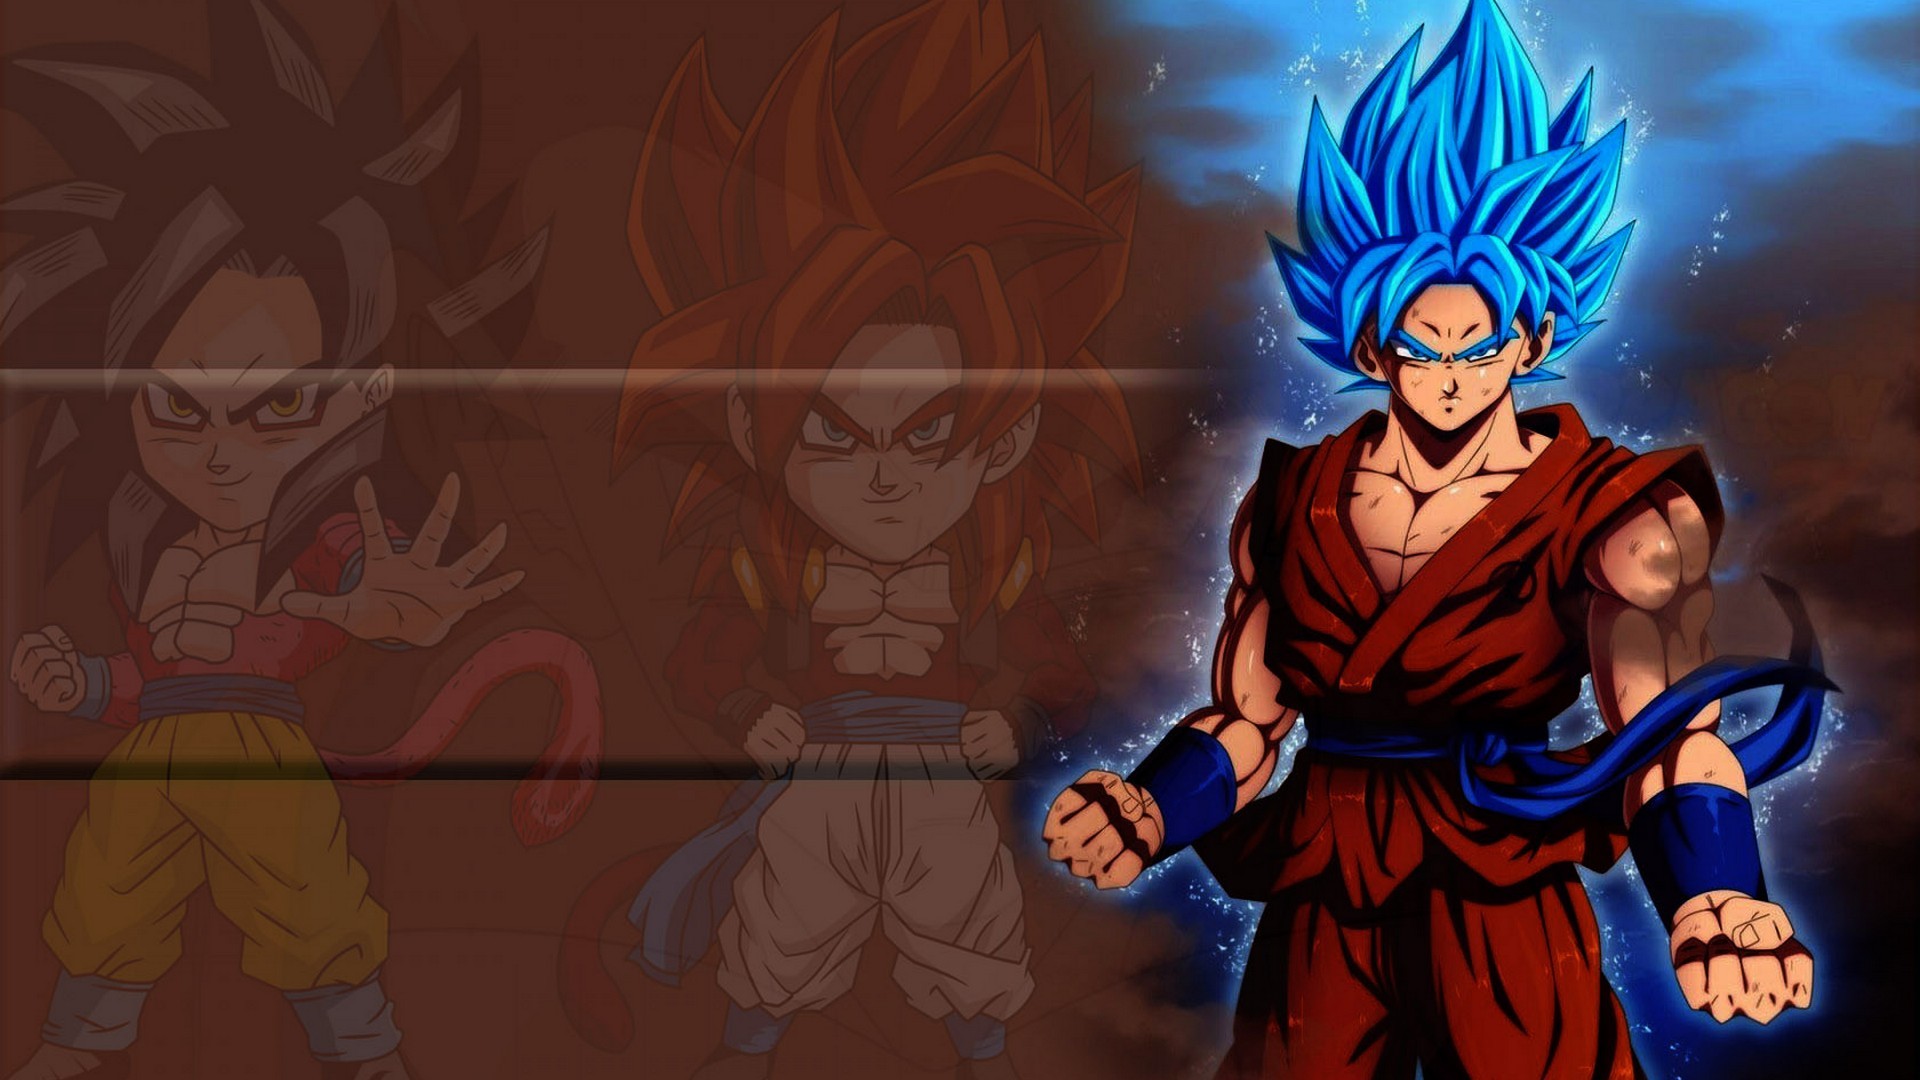 Wallpaper Goku SSJ Blue Desktop with image resolution 1920x1080 pixel. You can use this wallpaper as background for your desktop Computer Screensavers, Android or iPhone smartphones